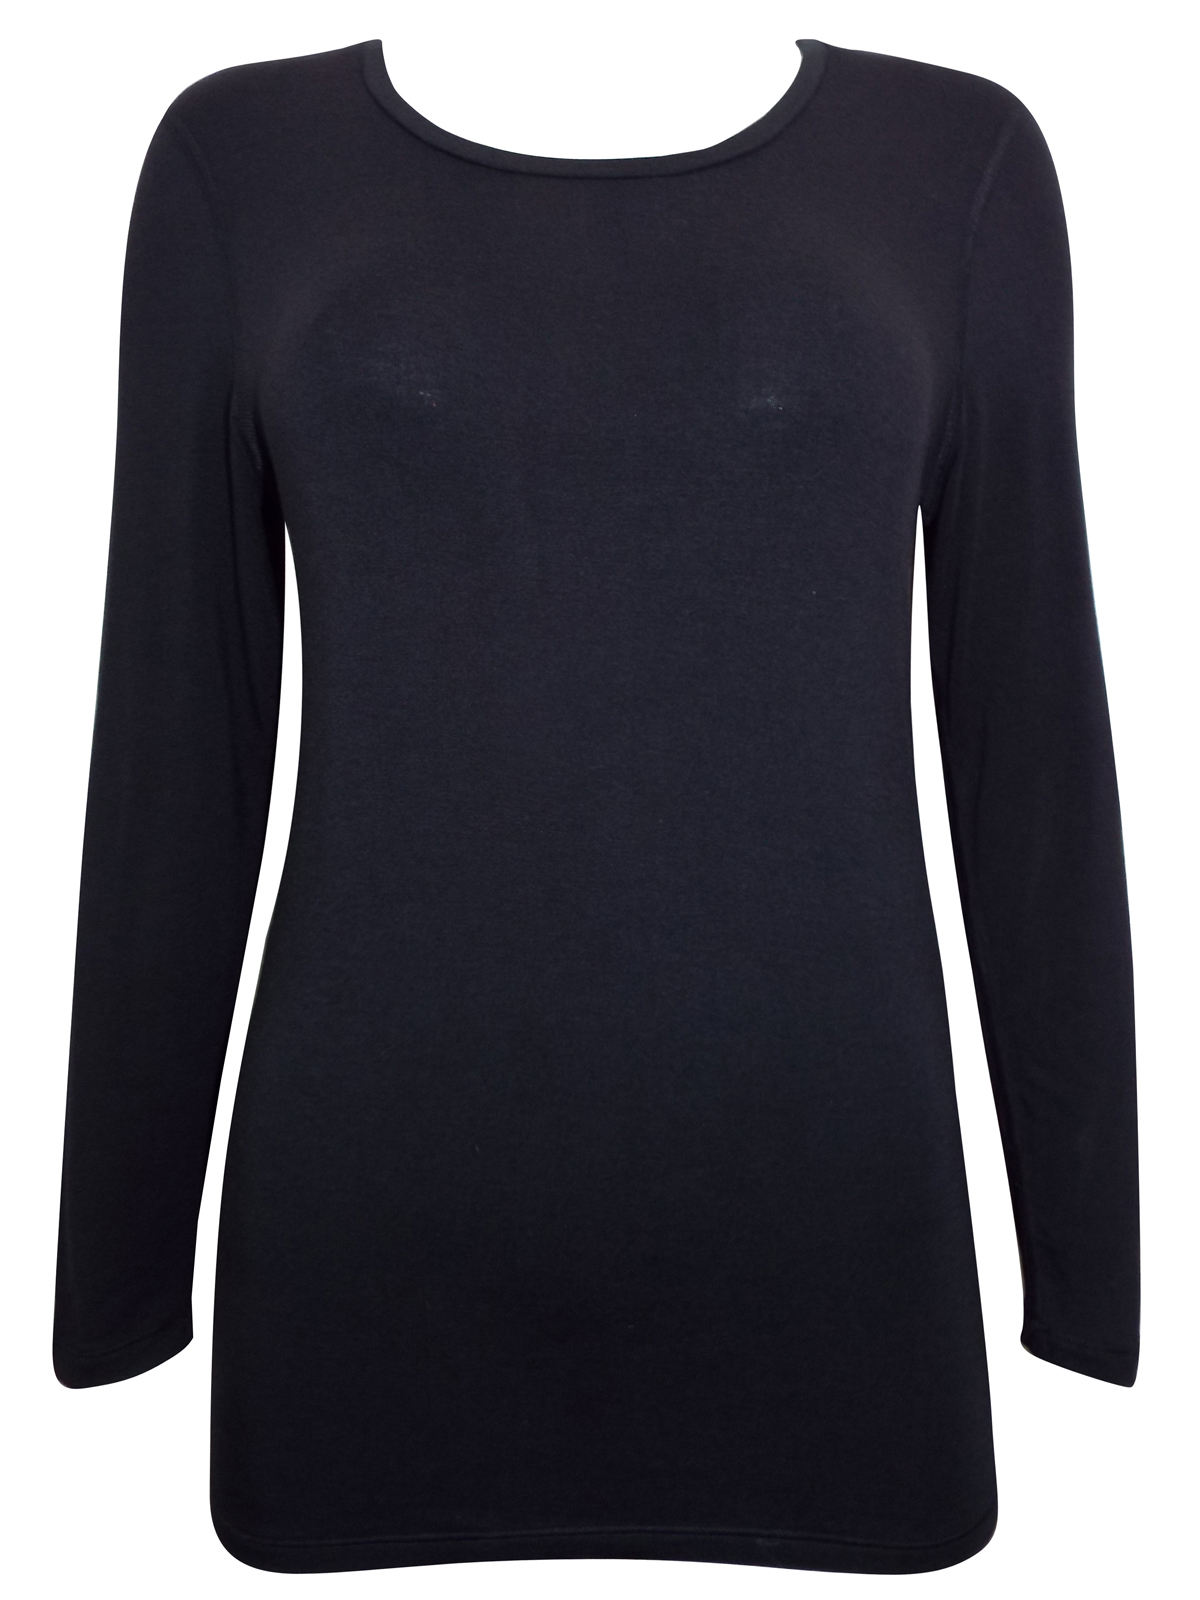 George - - BLACK Thermal Long Sleeve Scoop Neck Top - Size 14 to 22